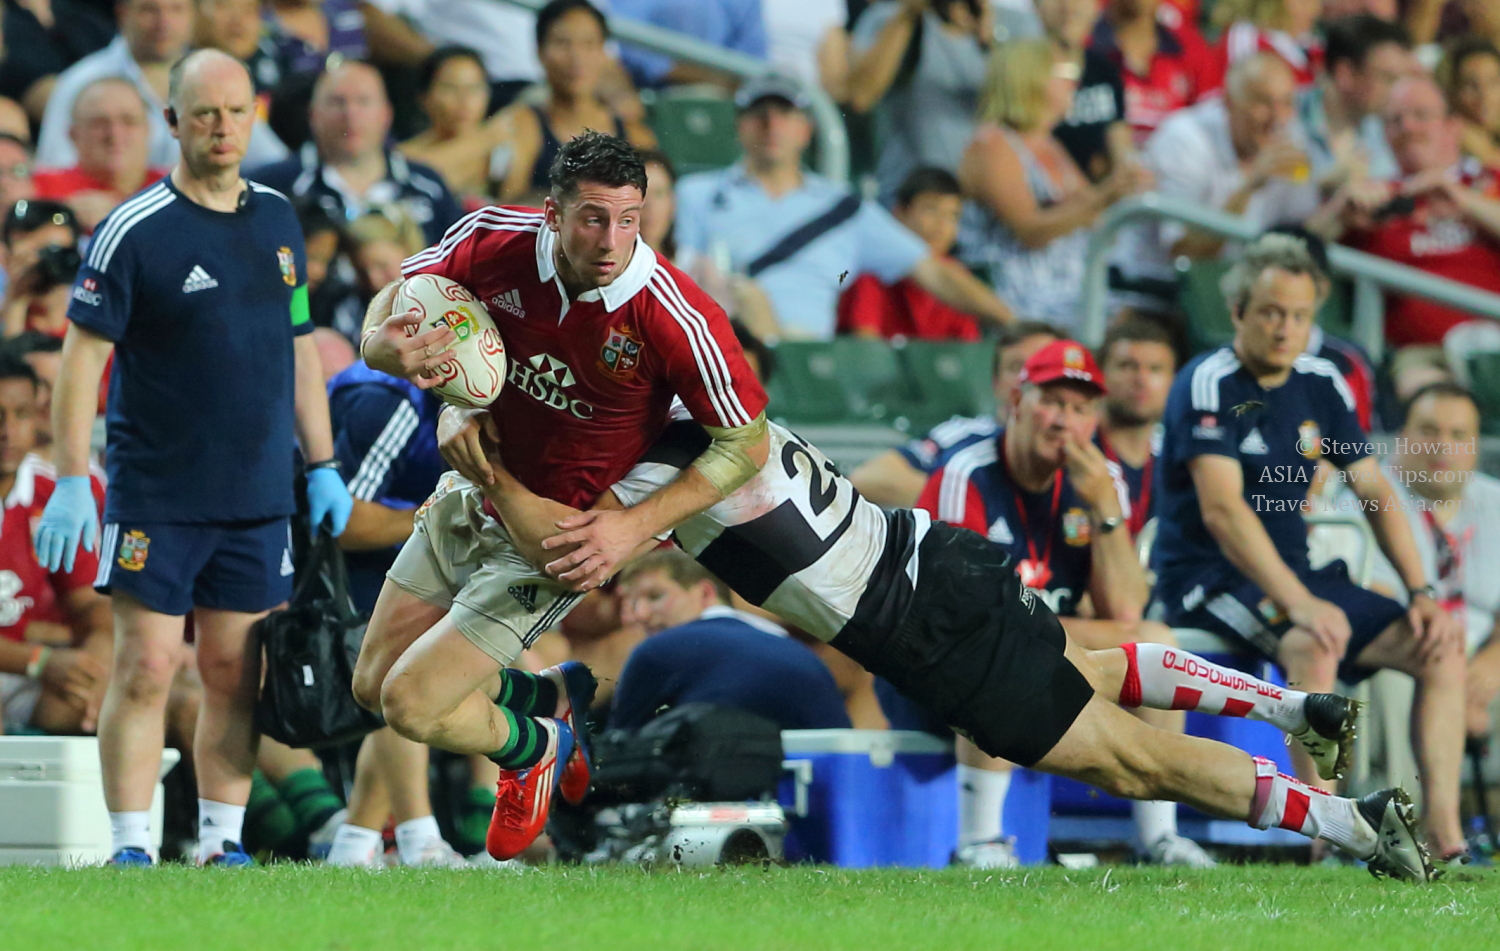 The British & Irish Lions in action against the Barbarians in Hong Kong in 2013. Picture by Steven Howard of TravelNewsAsia.com Click to enlarge.